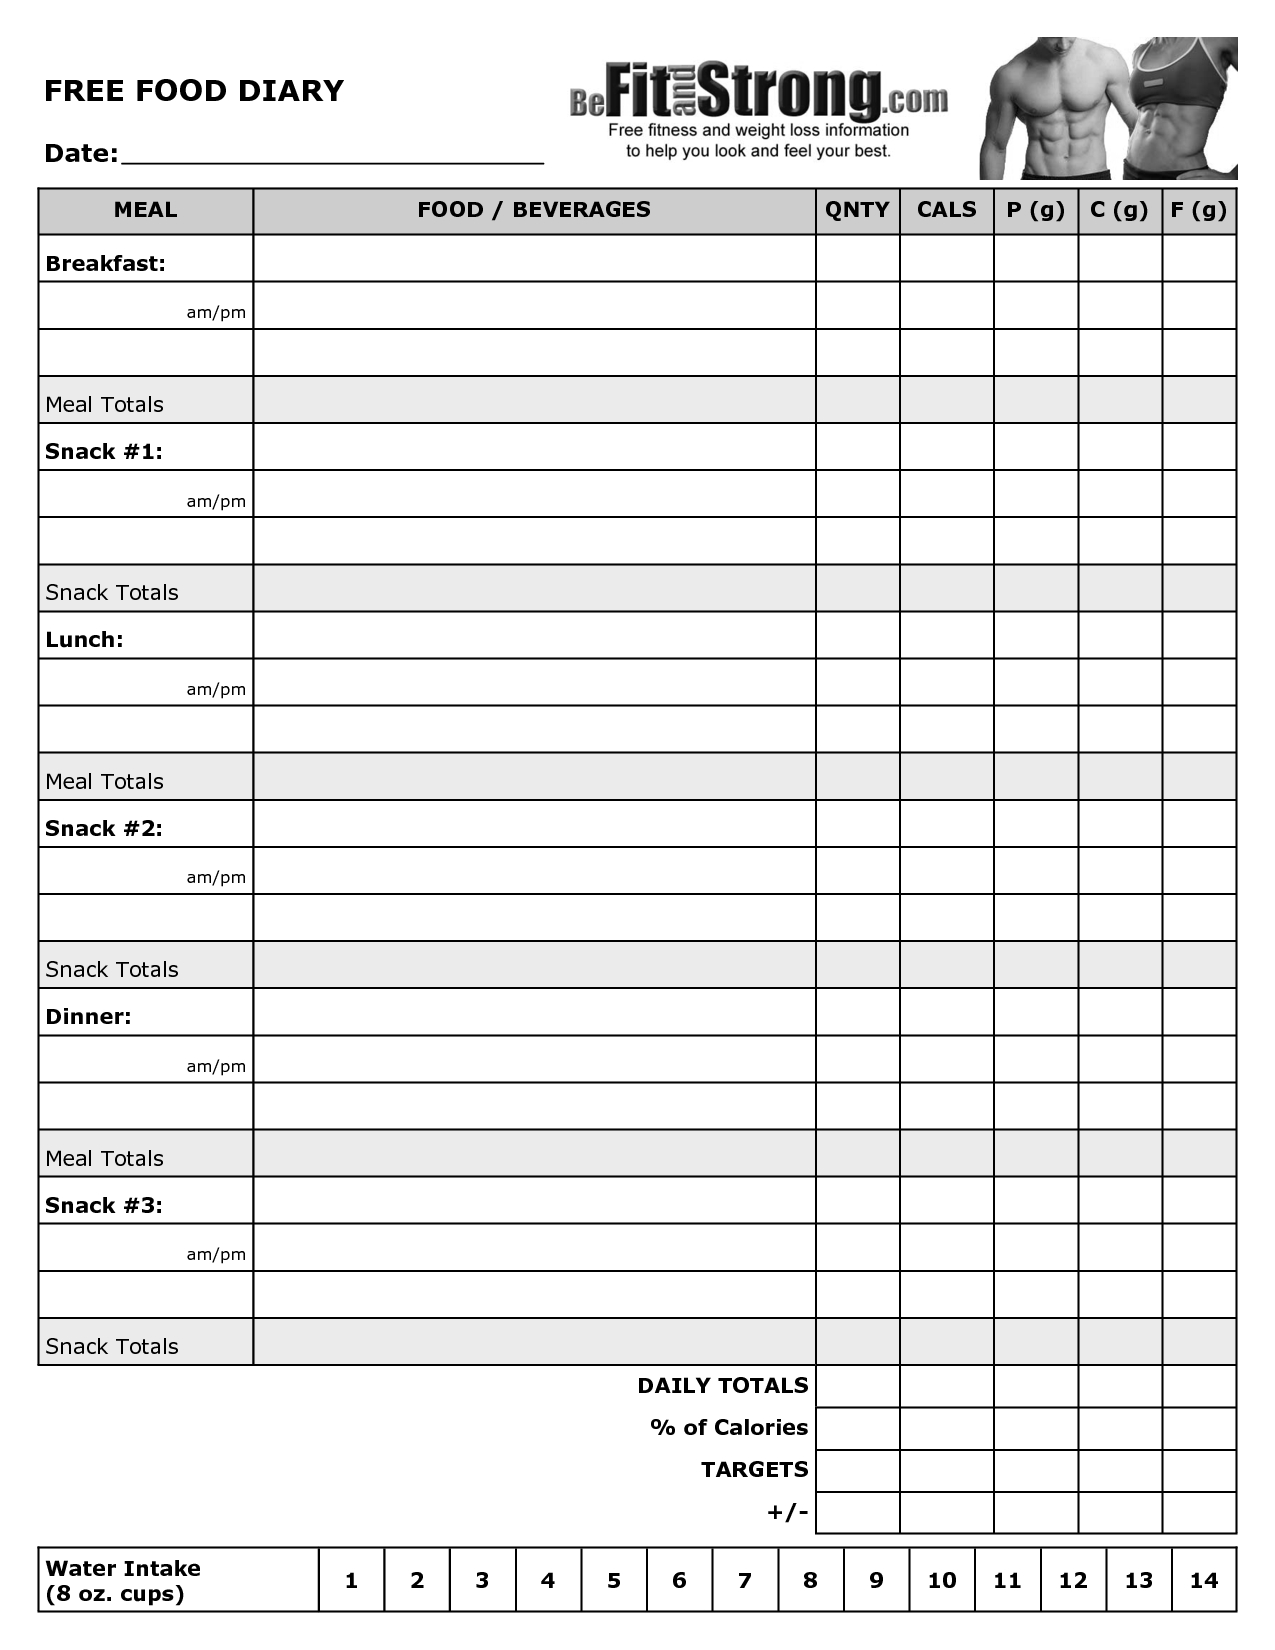 Free Printable Food Diary Template | Health, Fitness &amp; Weight Loss - Diet Logs Printable Free